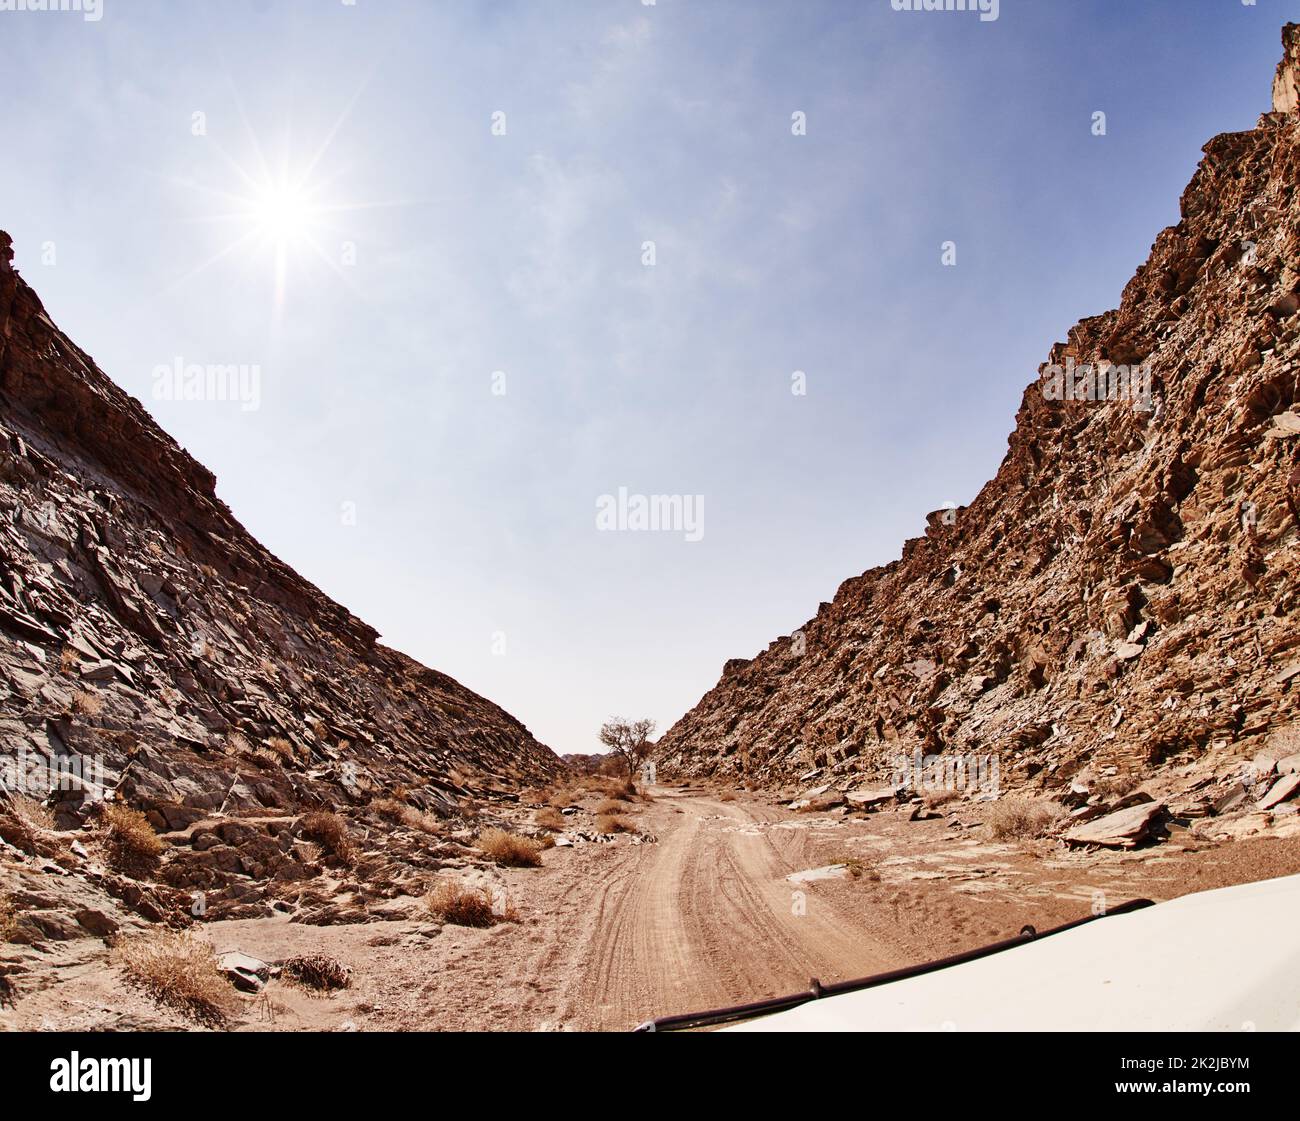 Just you and the open road. Shot of a dirt road running through rugged terrain. Stock Photo